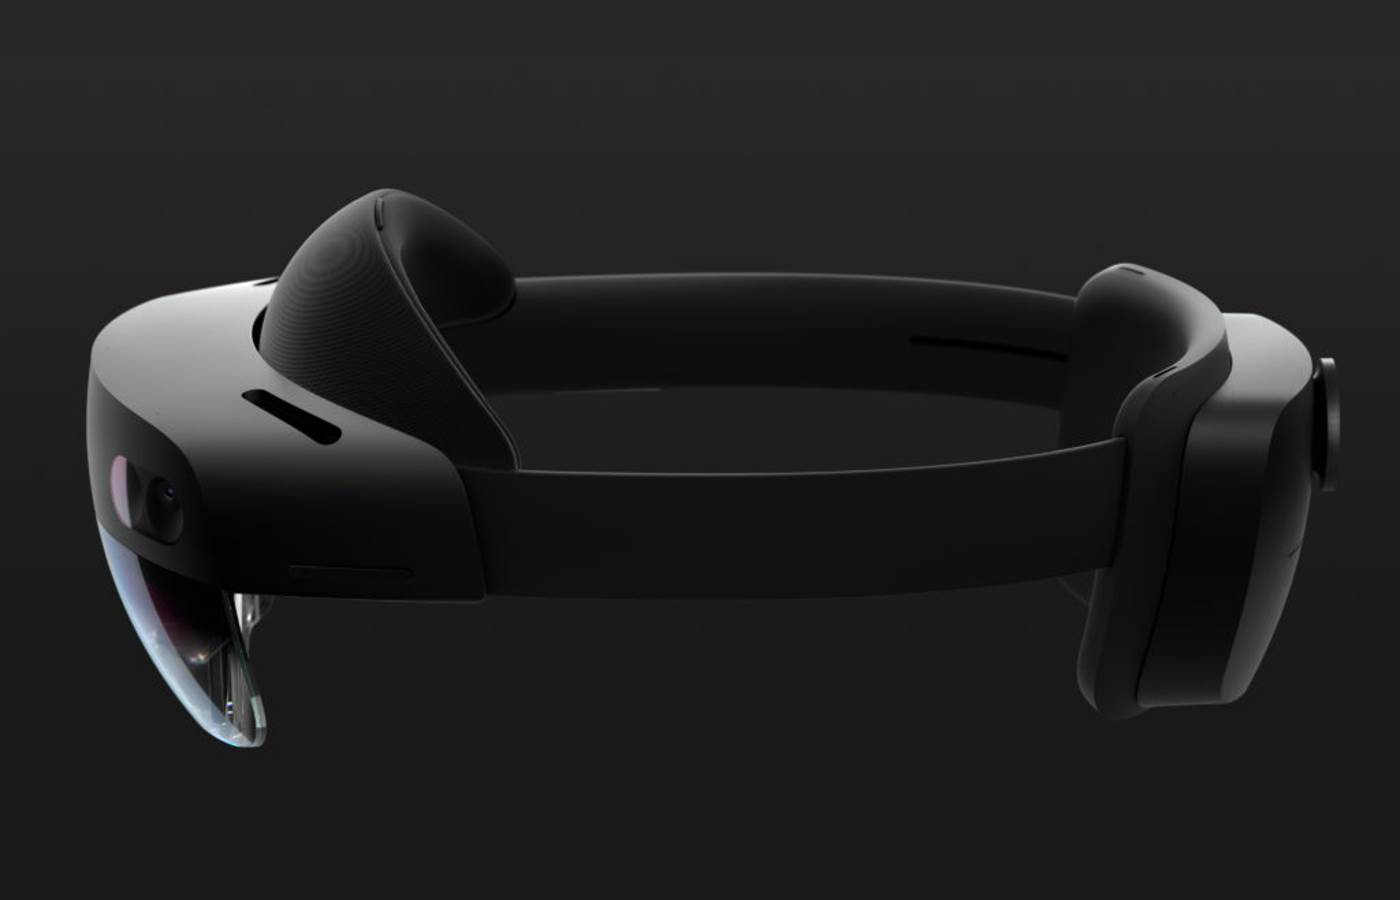 One of the major XR platforms used in business applications is Microsoft Hololens 2. We are proud to announce that Interhaptics will support hand tracking interactions design for Hololens 2 by the end of November 2020. 